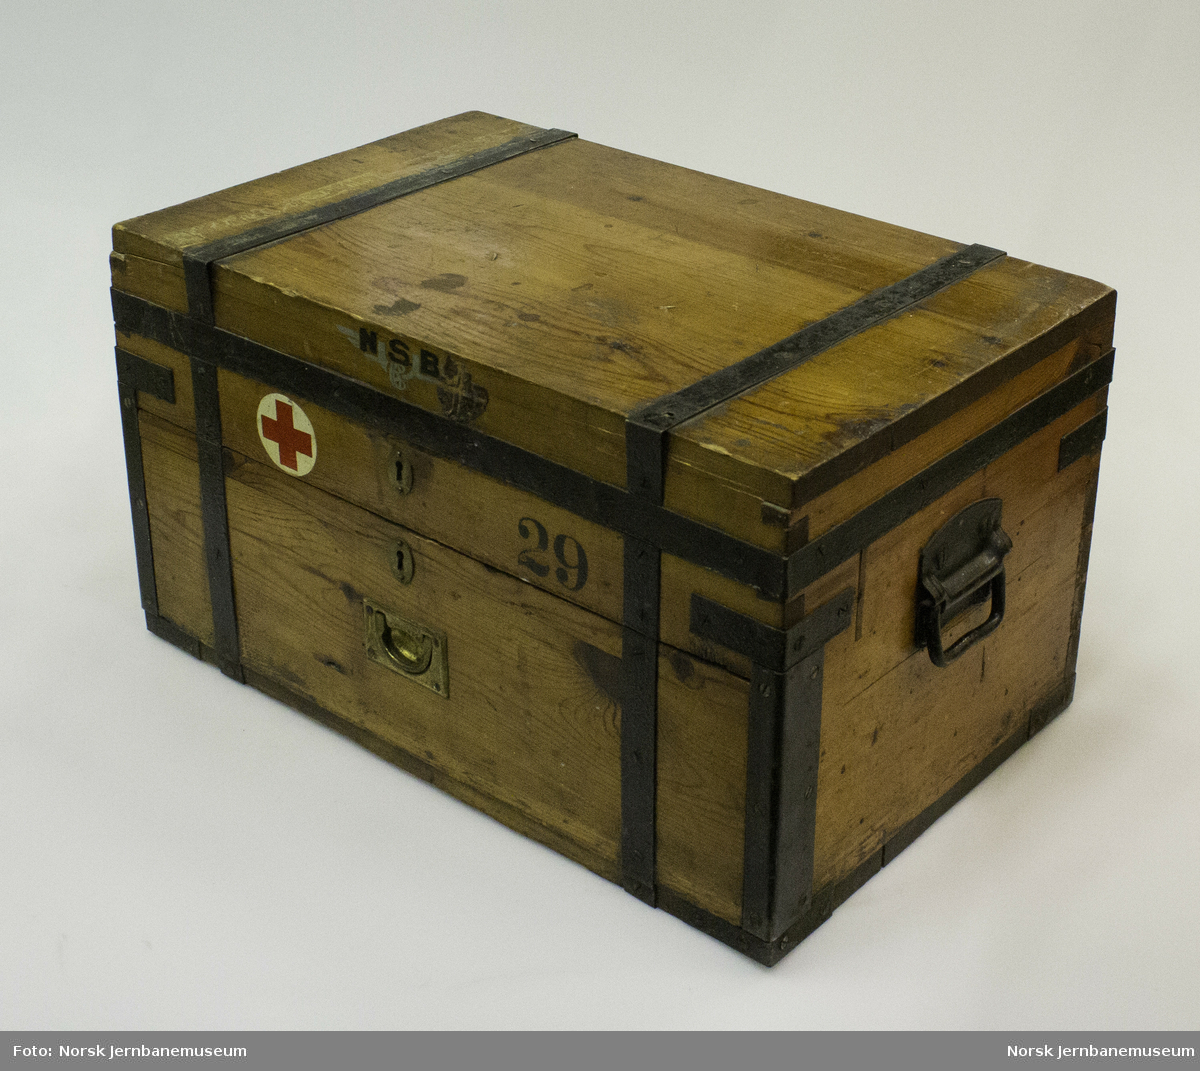 First aid box from the National state railsways (NSB) company health service. Contents include medicines, bandages and various first aid equipment.